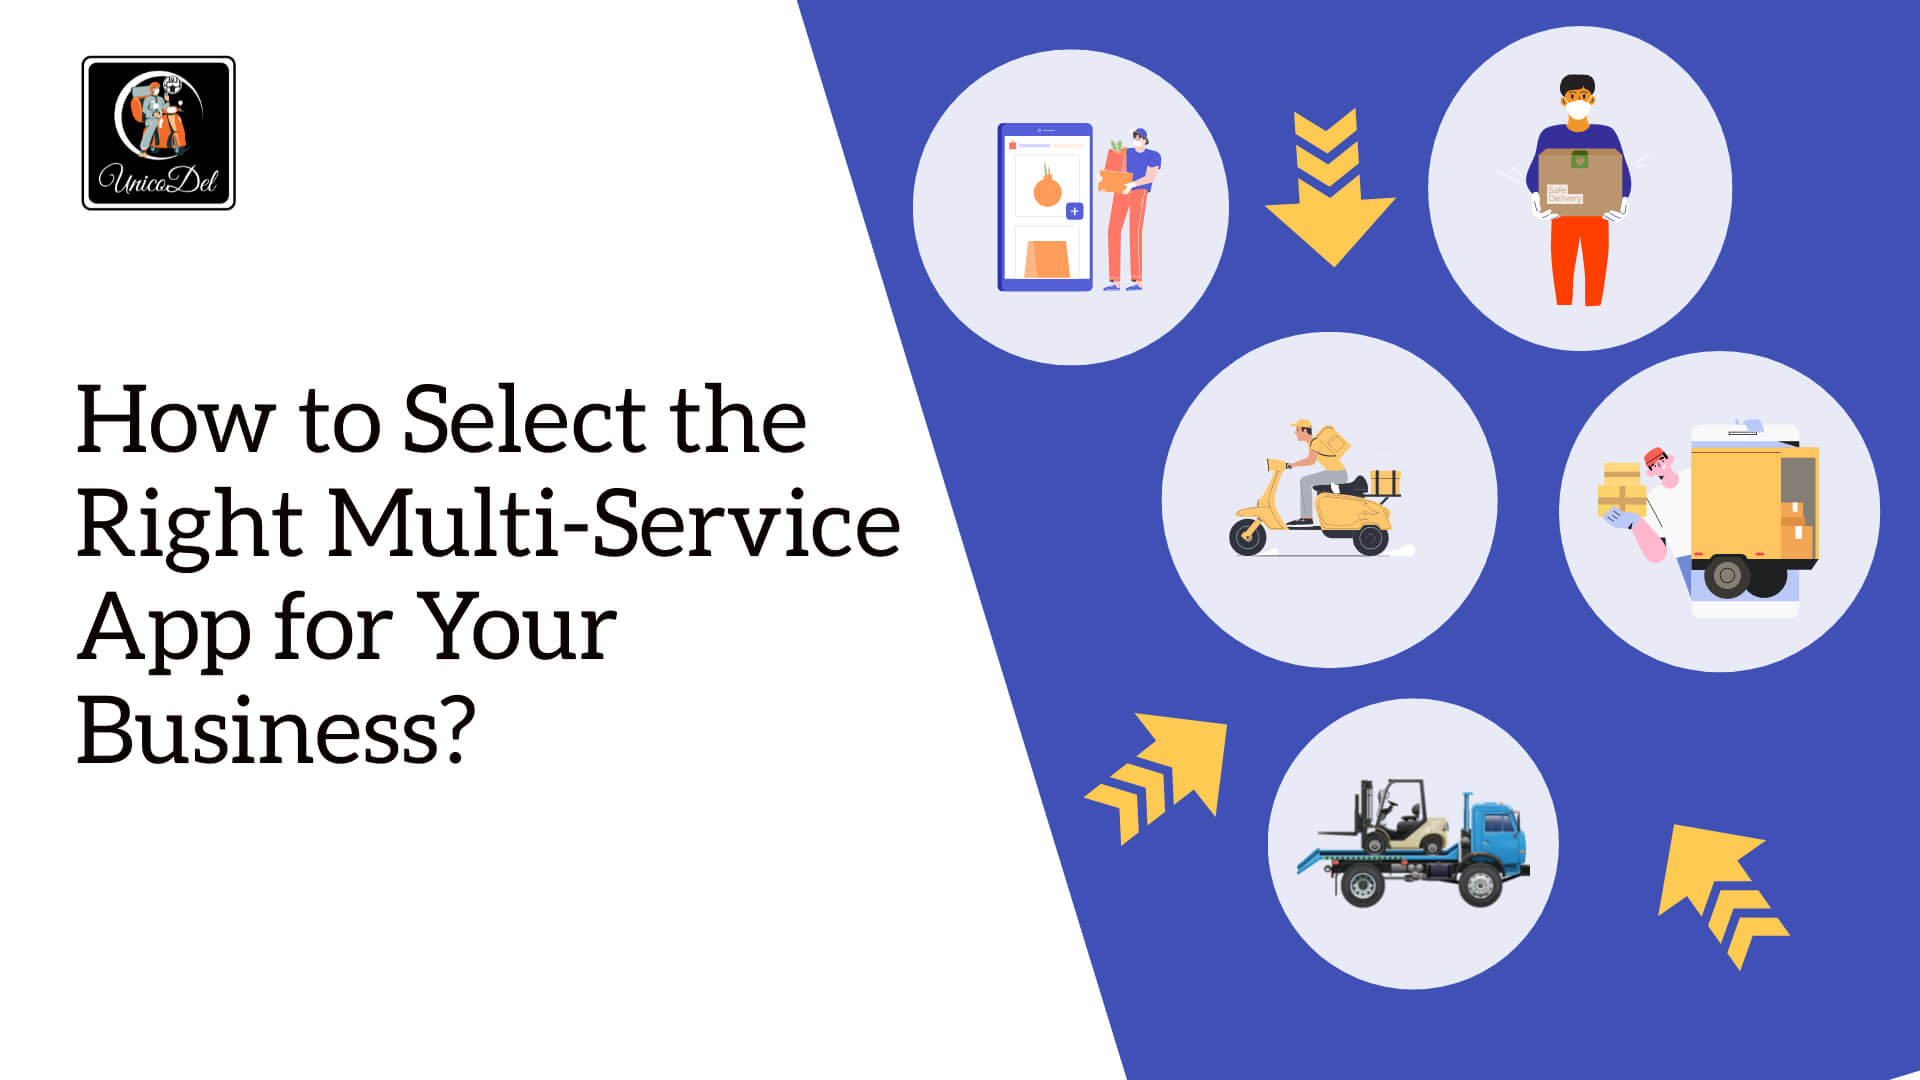 How to Select the Right Multi-Service App for Your Business?